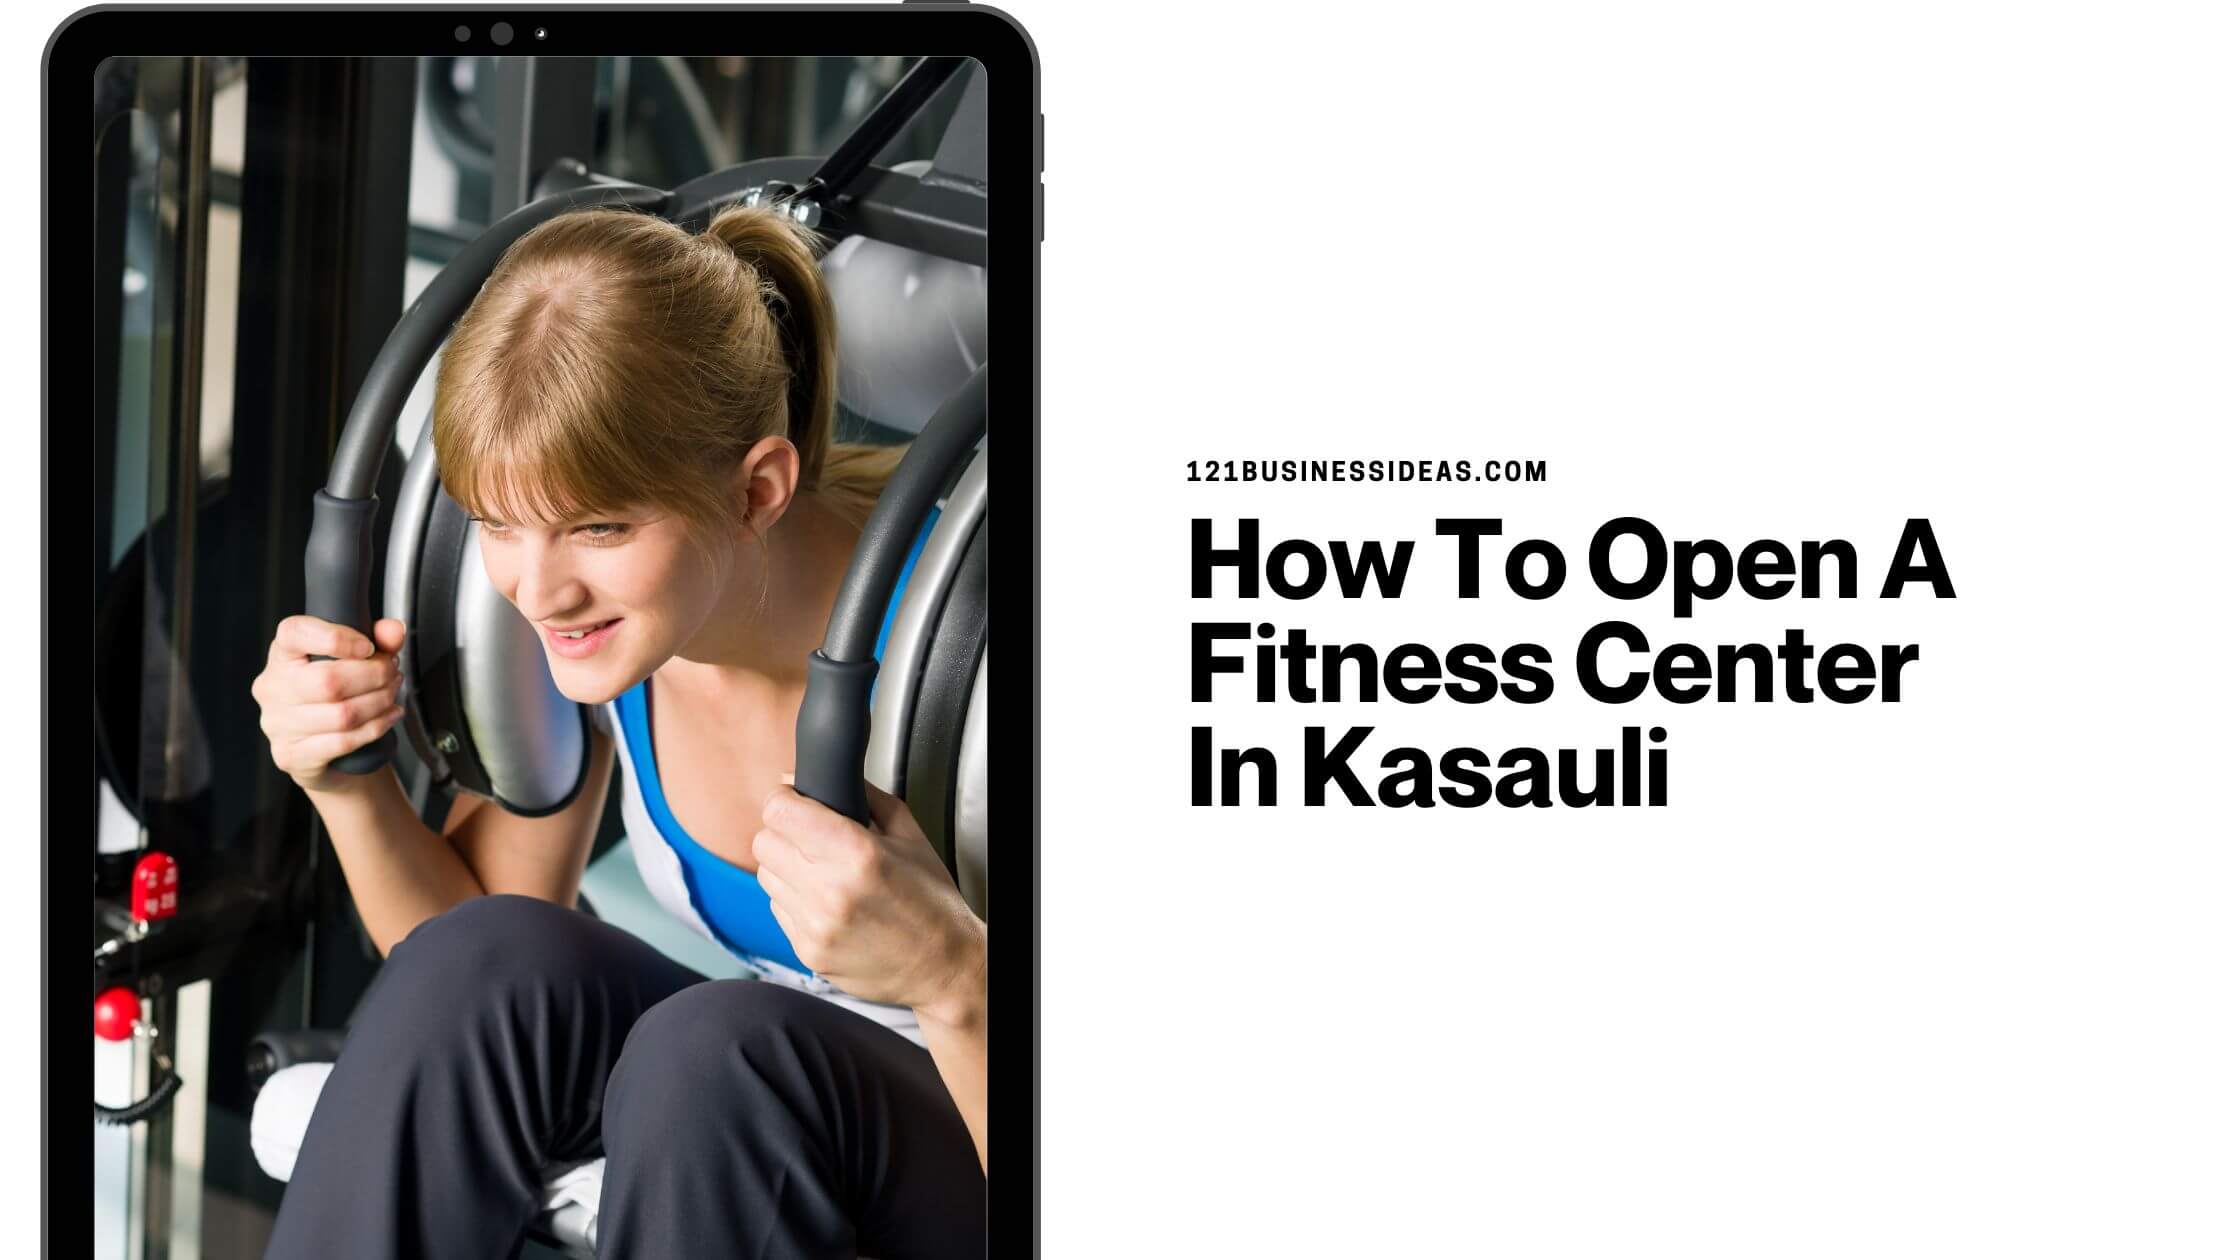 How To Open A Fitness Center In Kasauli (1)